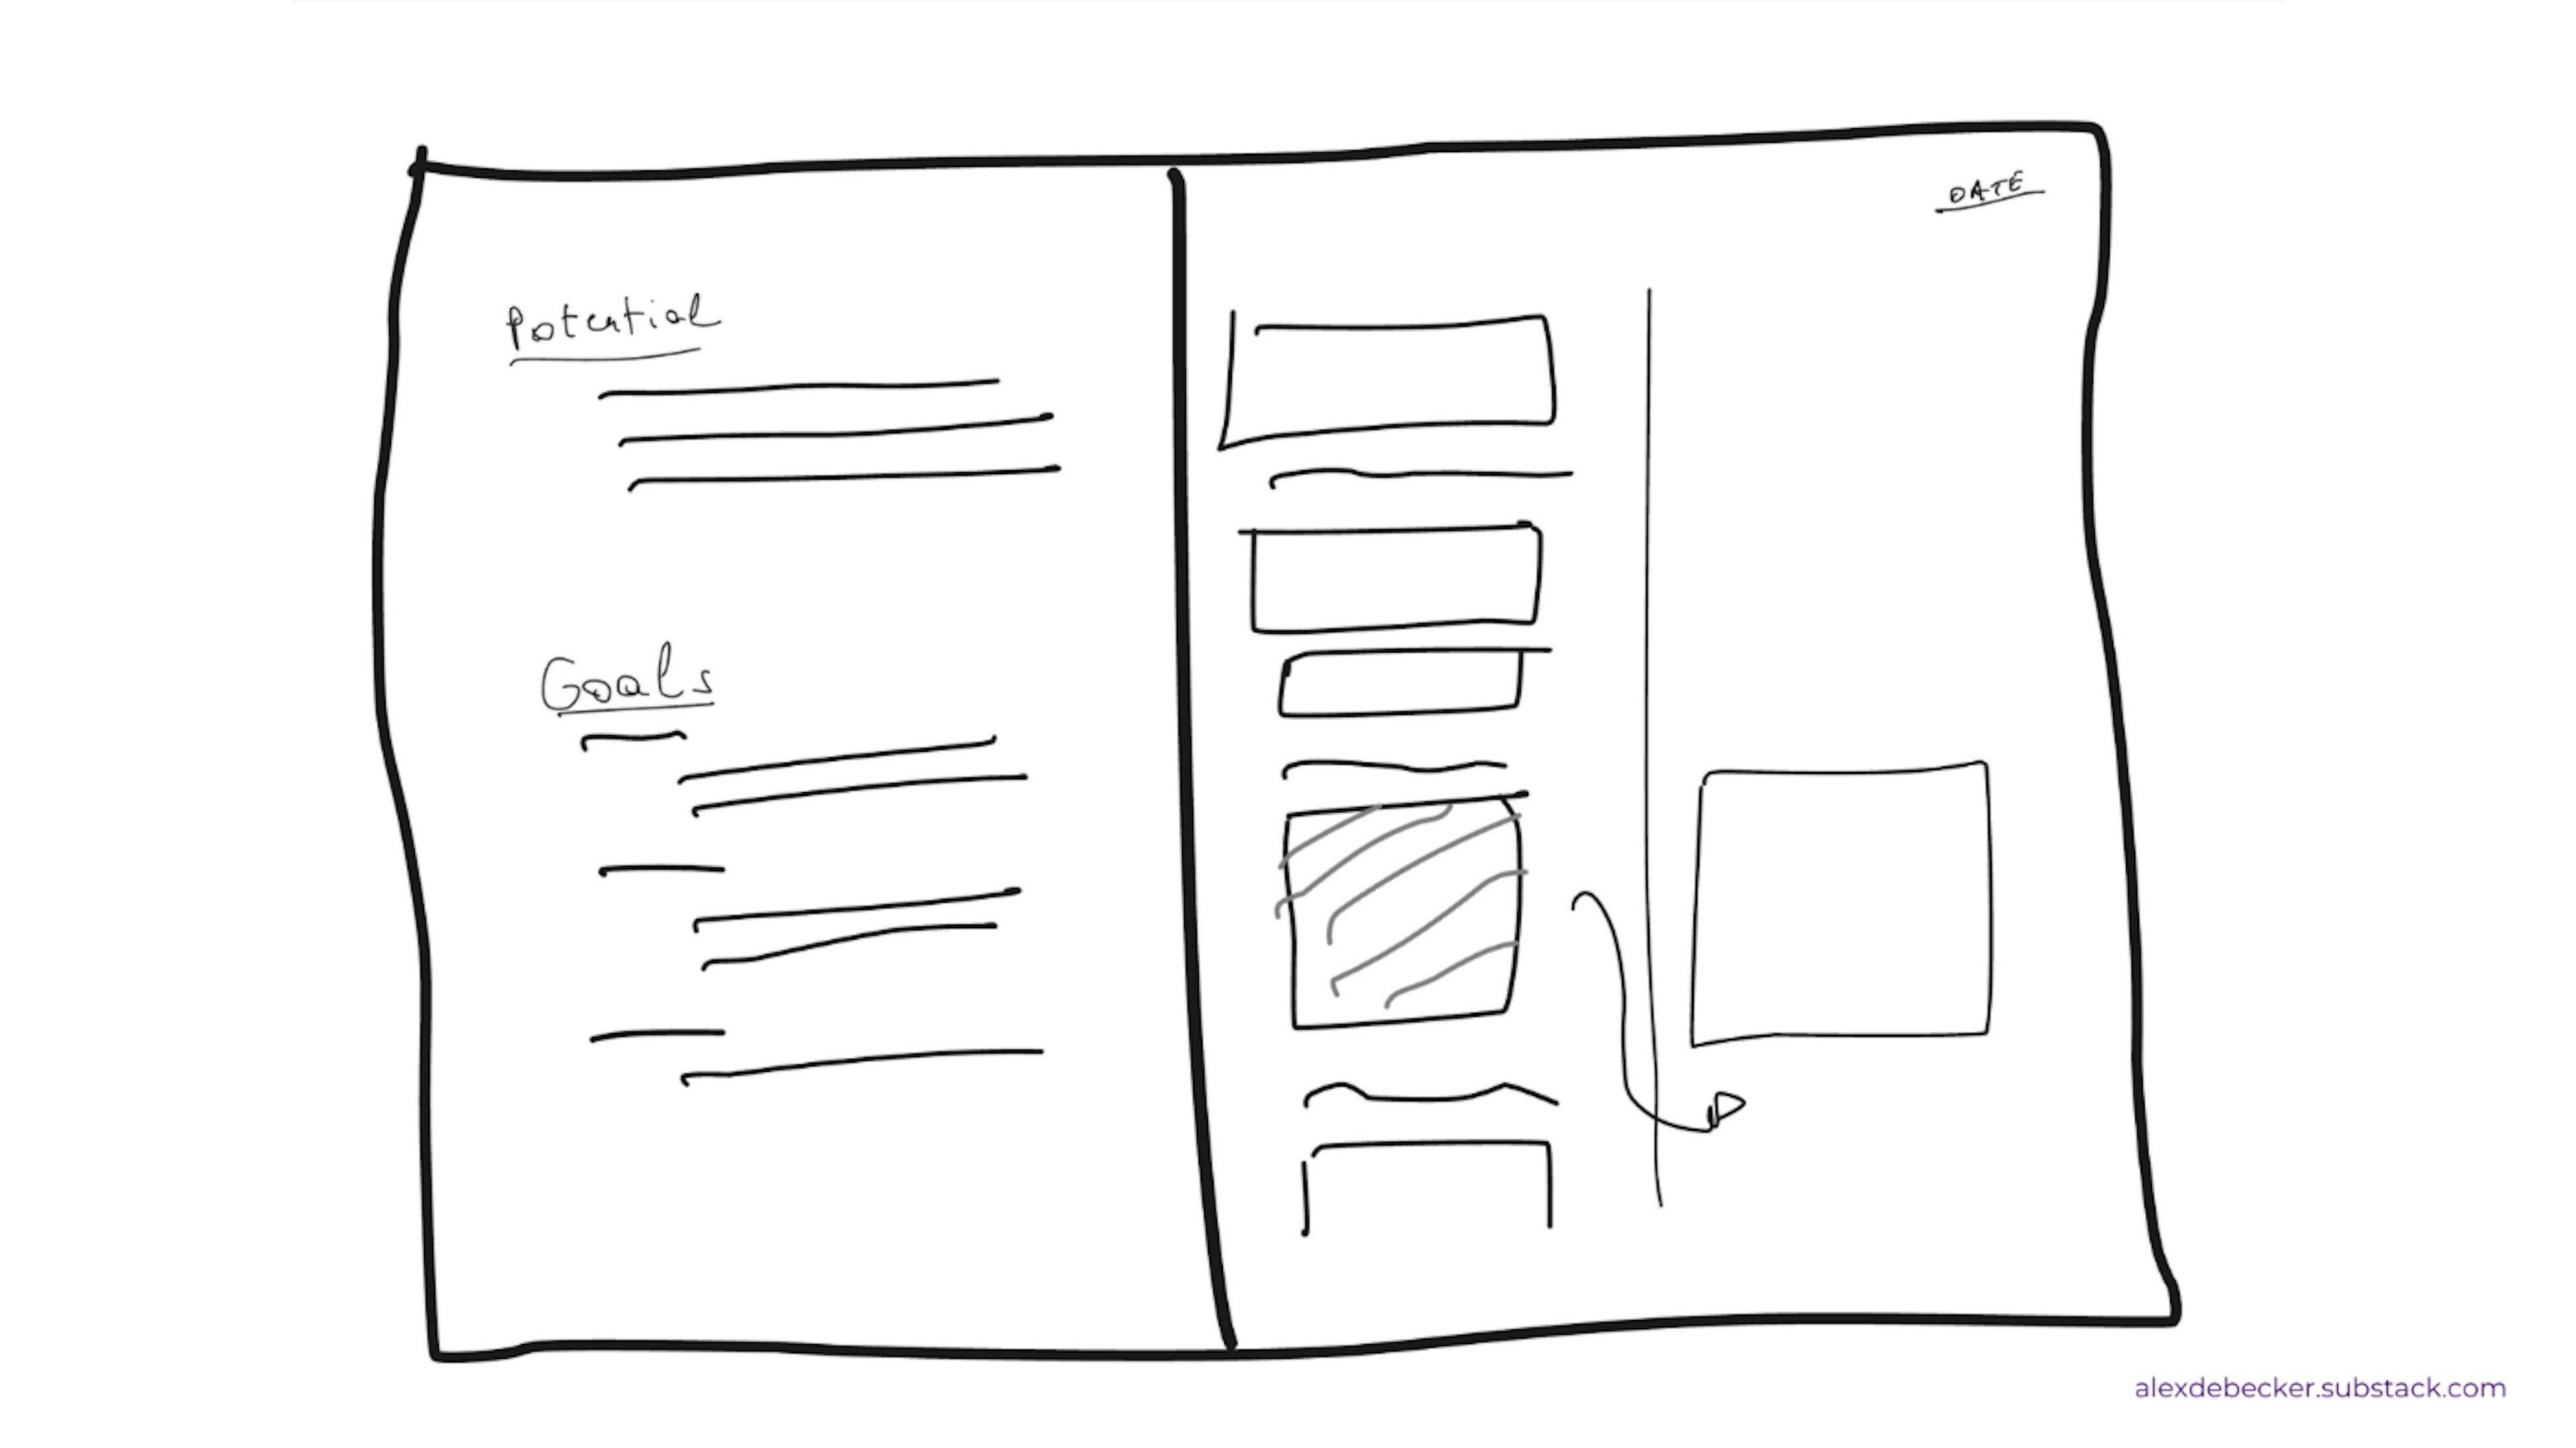 featured image - Timeboxing: How I Plan My Day (as a Product Manager)